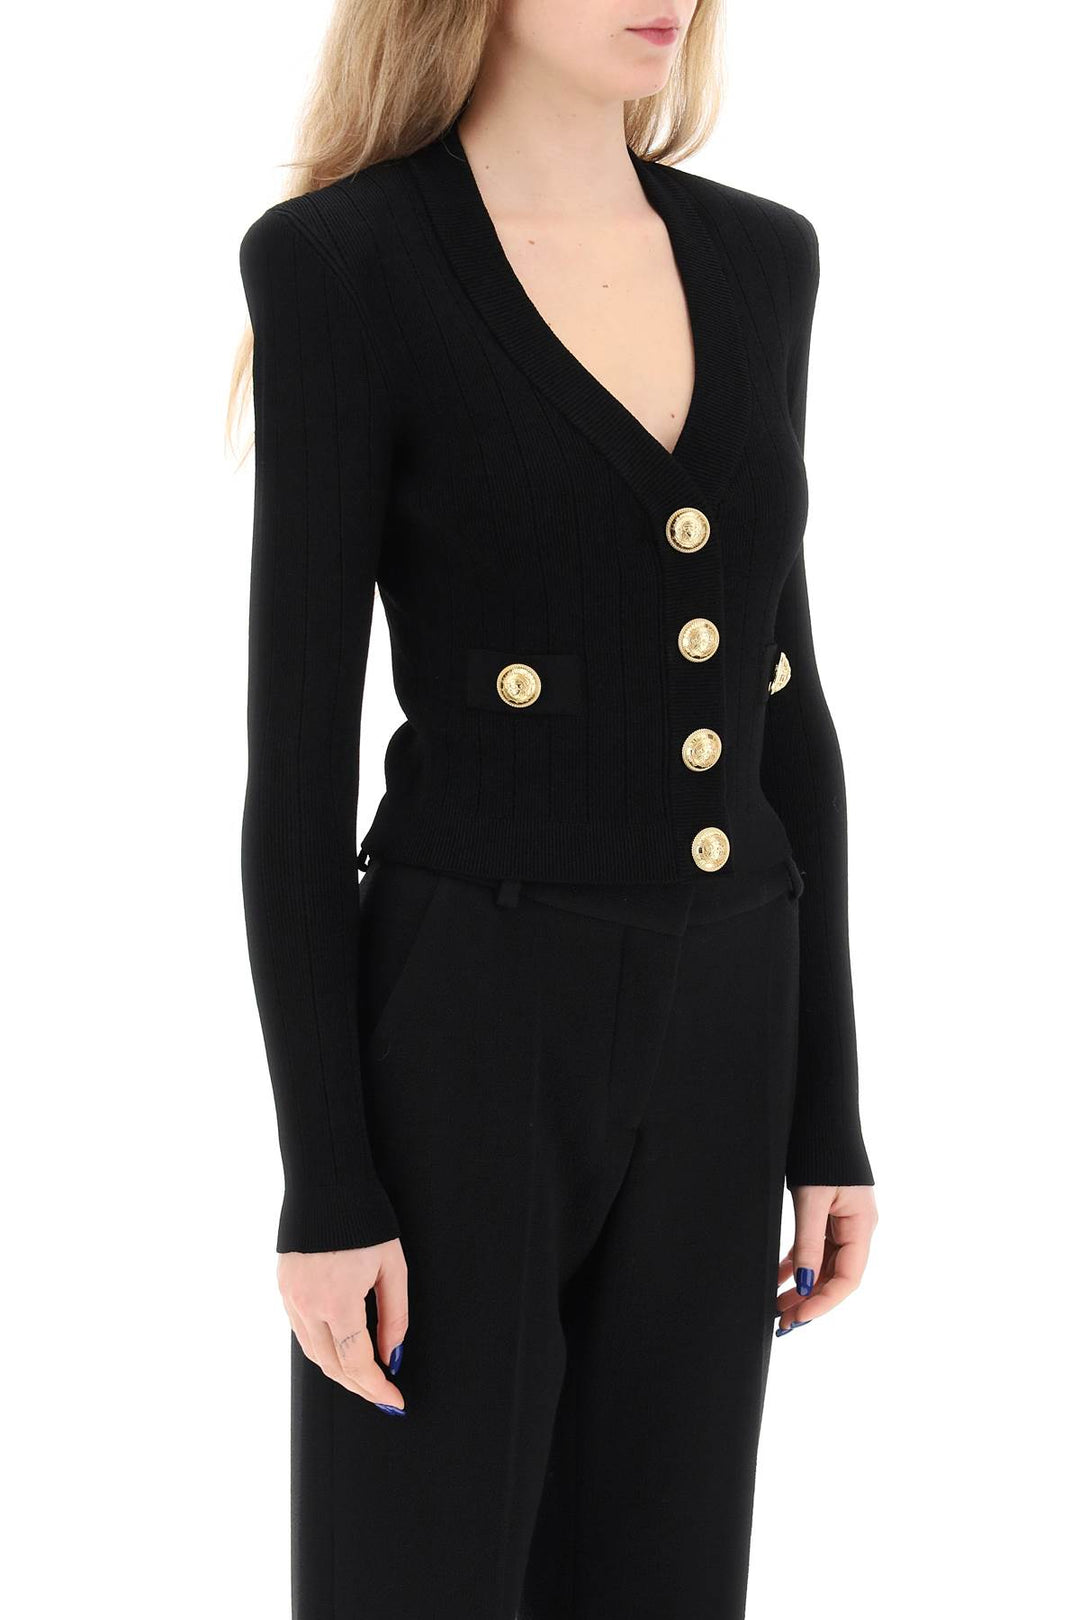 Balmain Cardigan With Structured Shoulders   Black